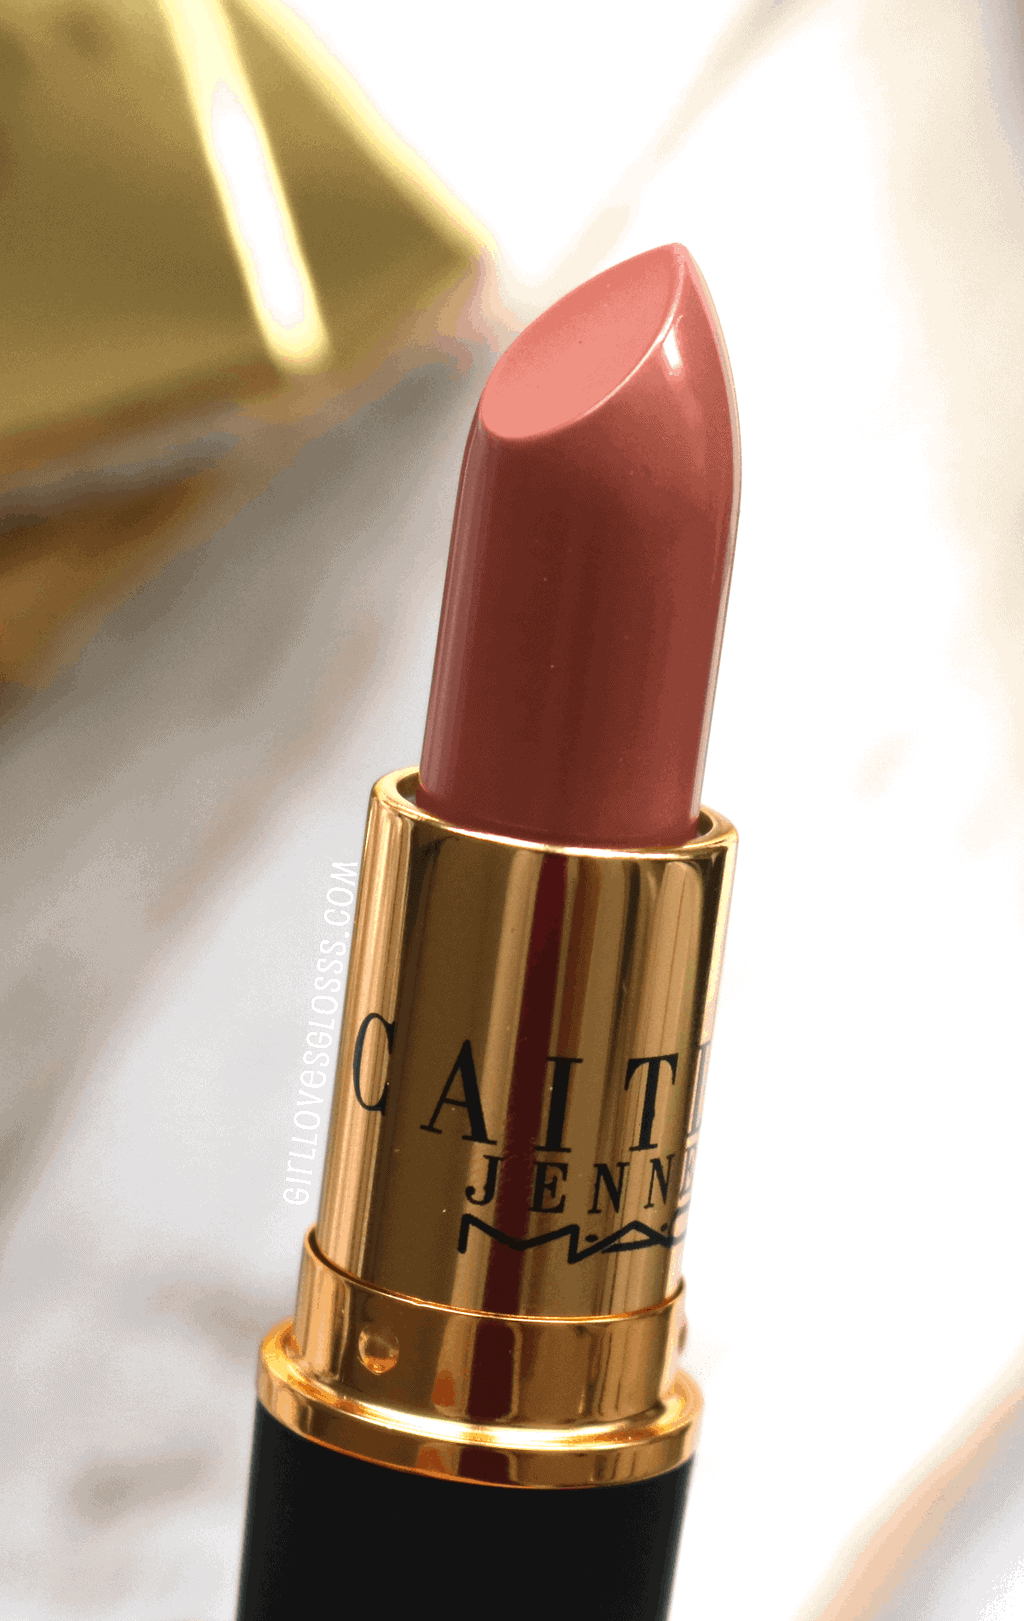 MAC Caitlyn Jenner Collection